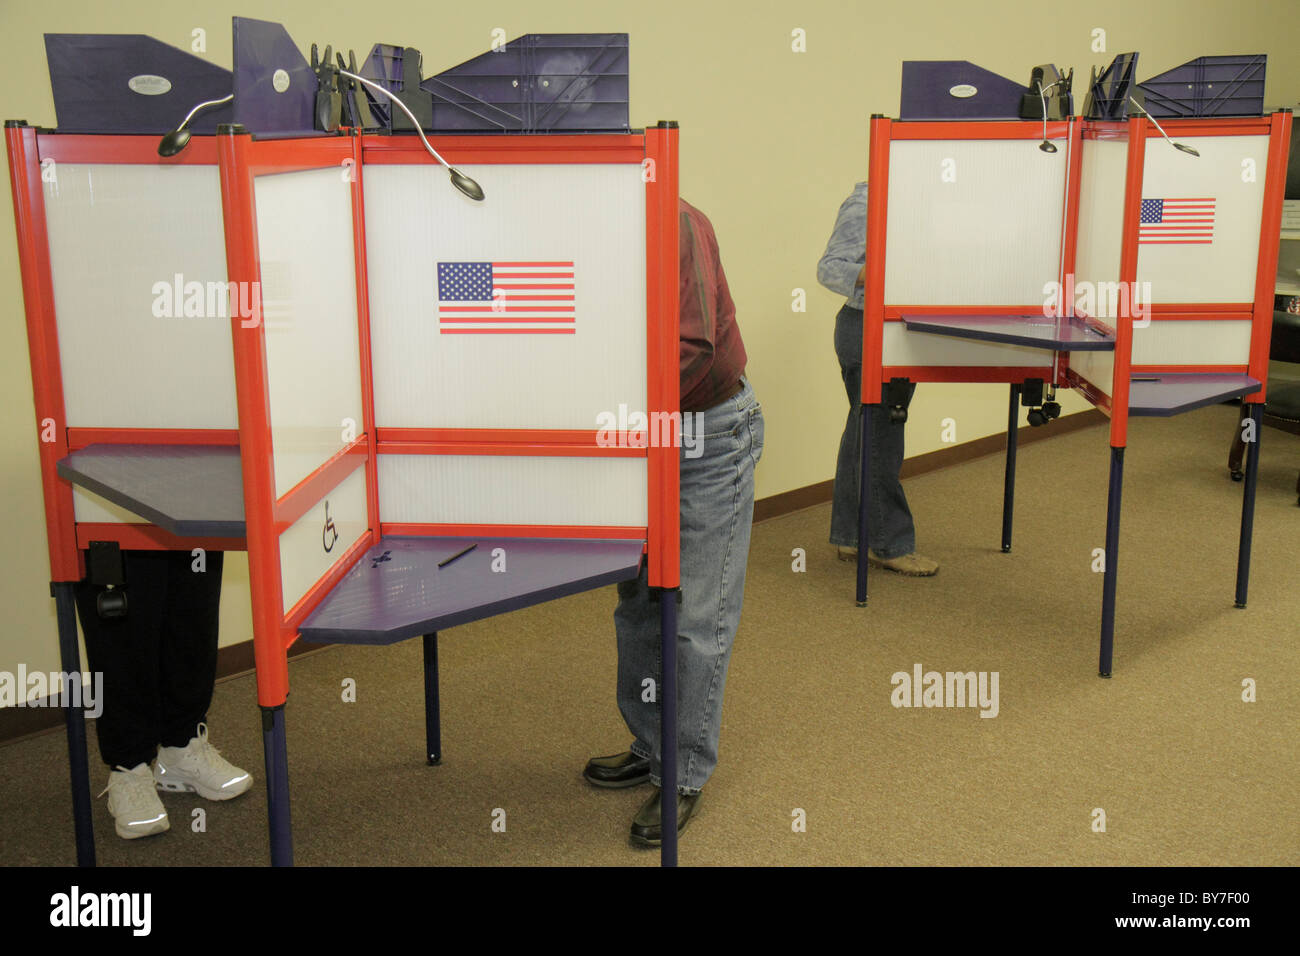 North Carolina,NC,South,Tar Heel State,Hayesville,small town,election,voting,government,local politics,early vote,voting,polling booth,secrecy,confide Stock Photo